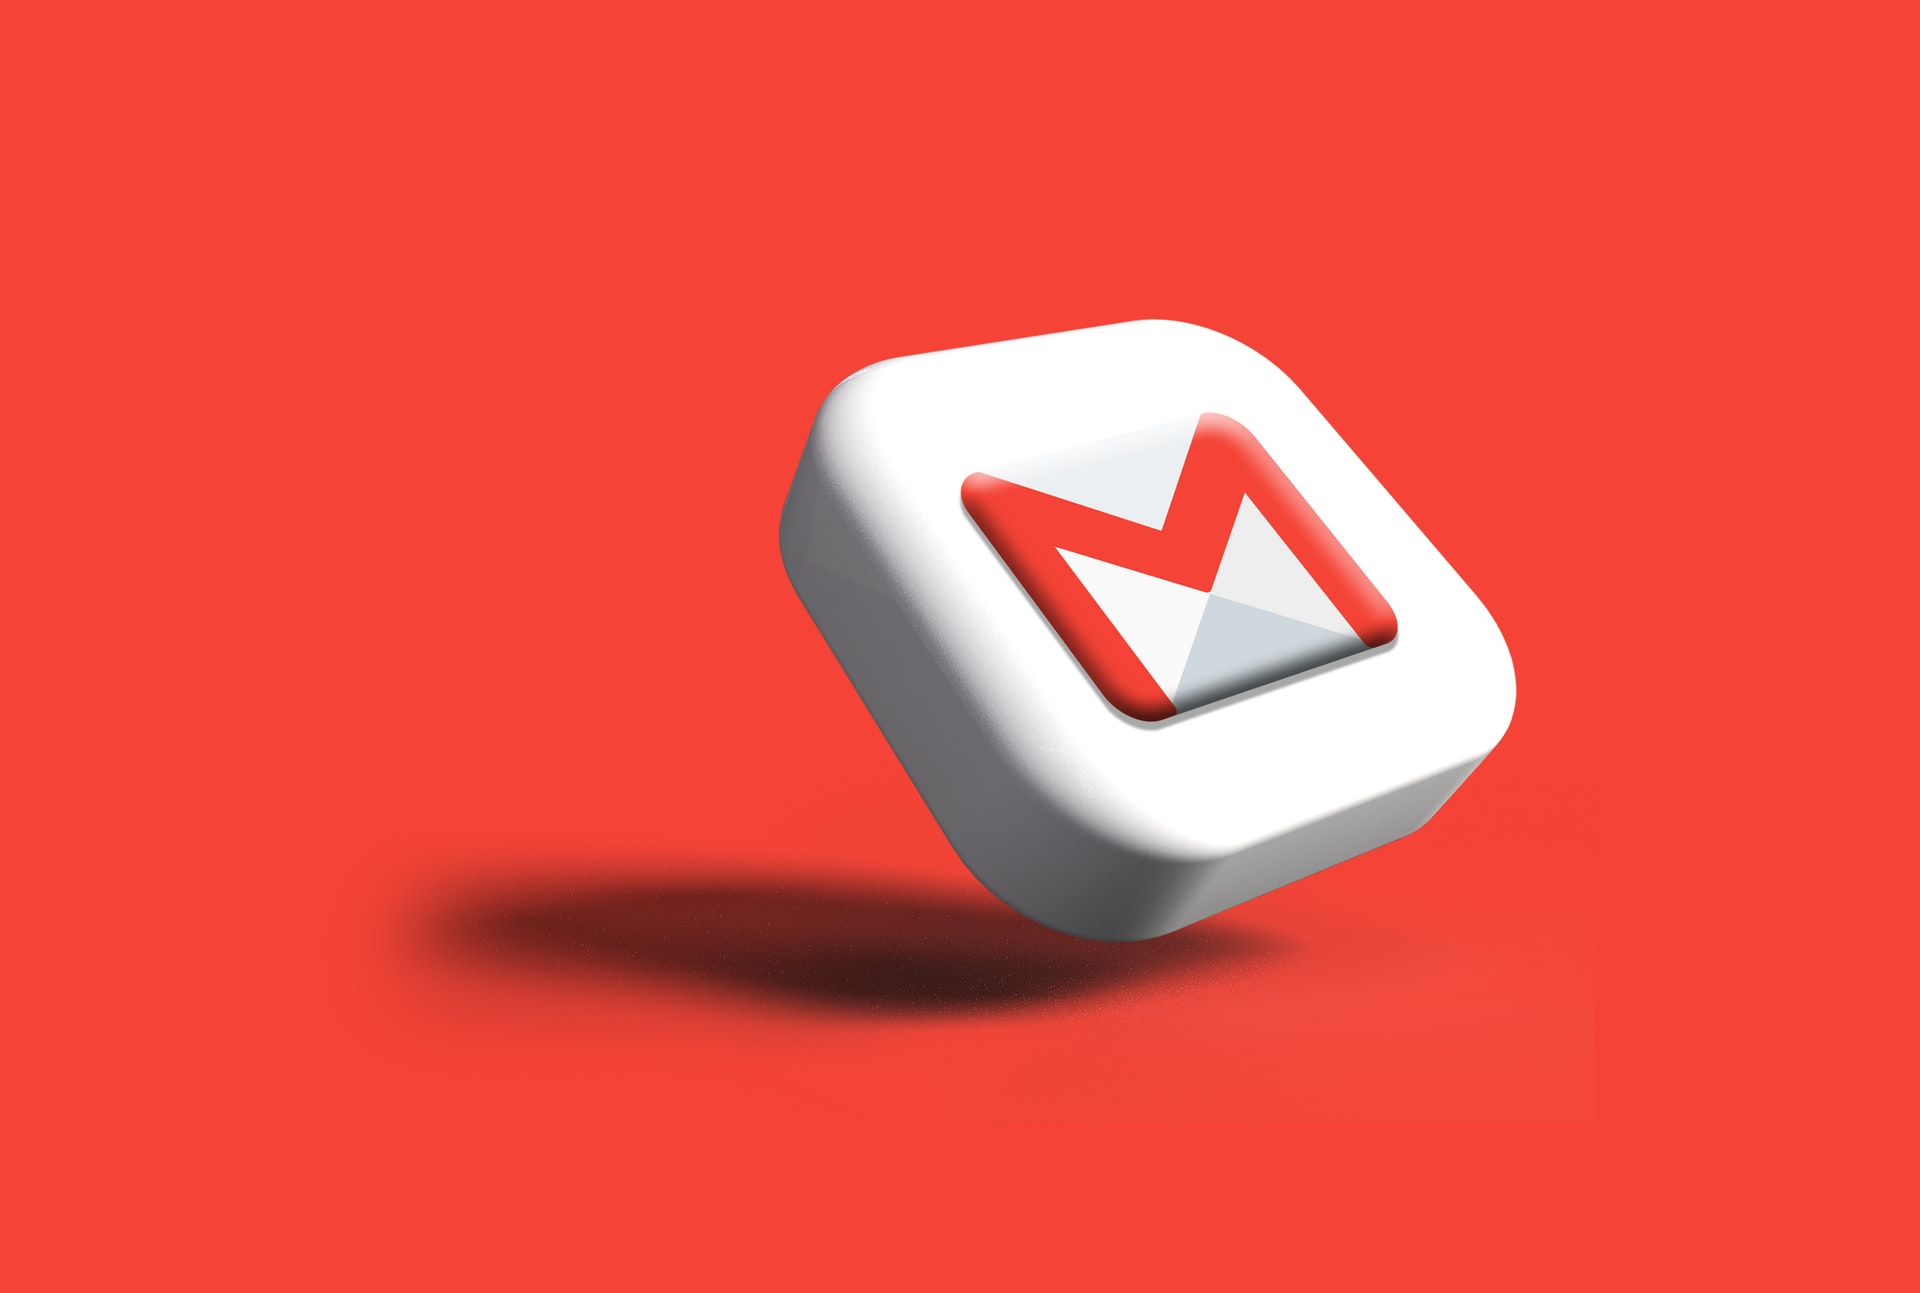 Gmail Integration with Salesforce